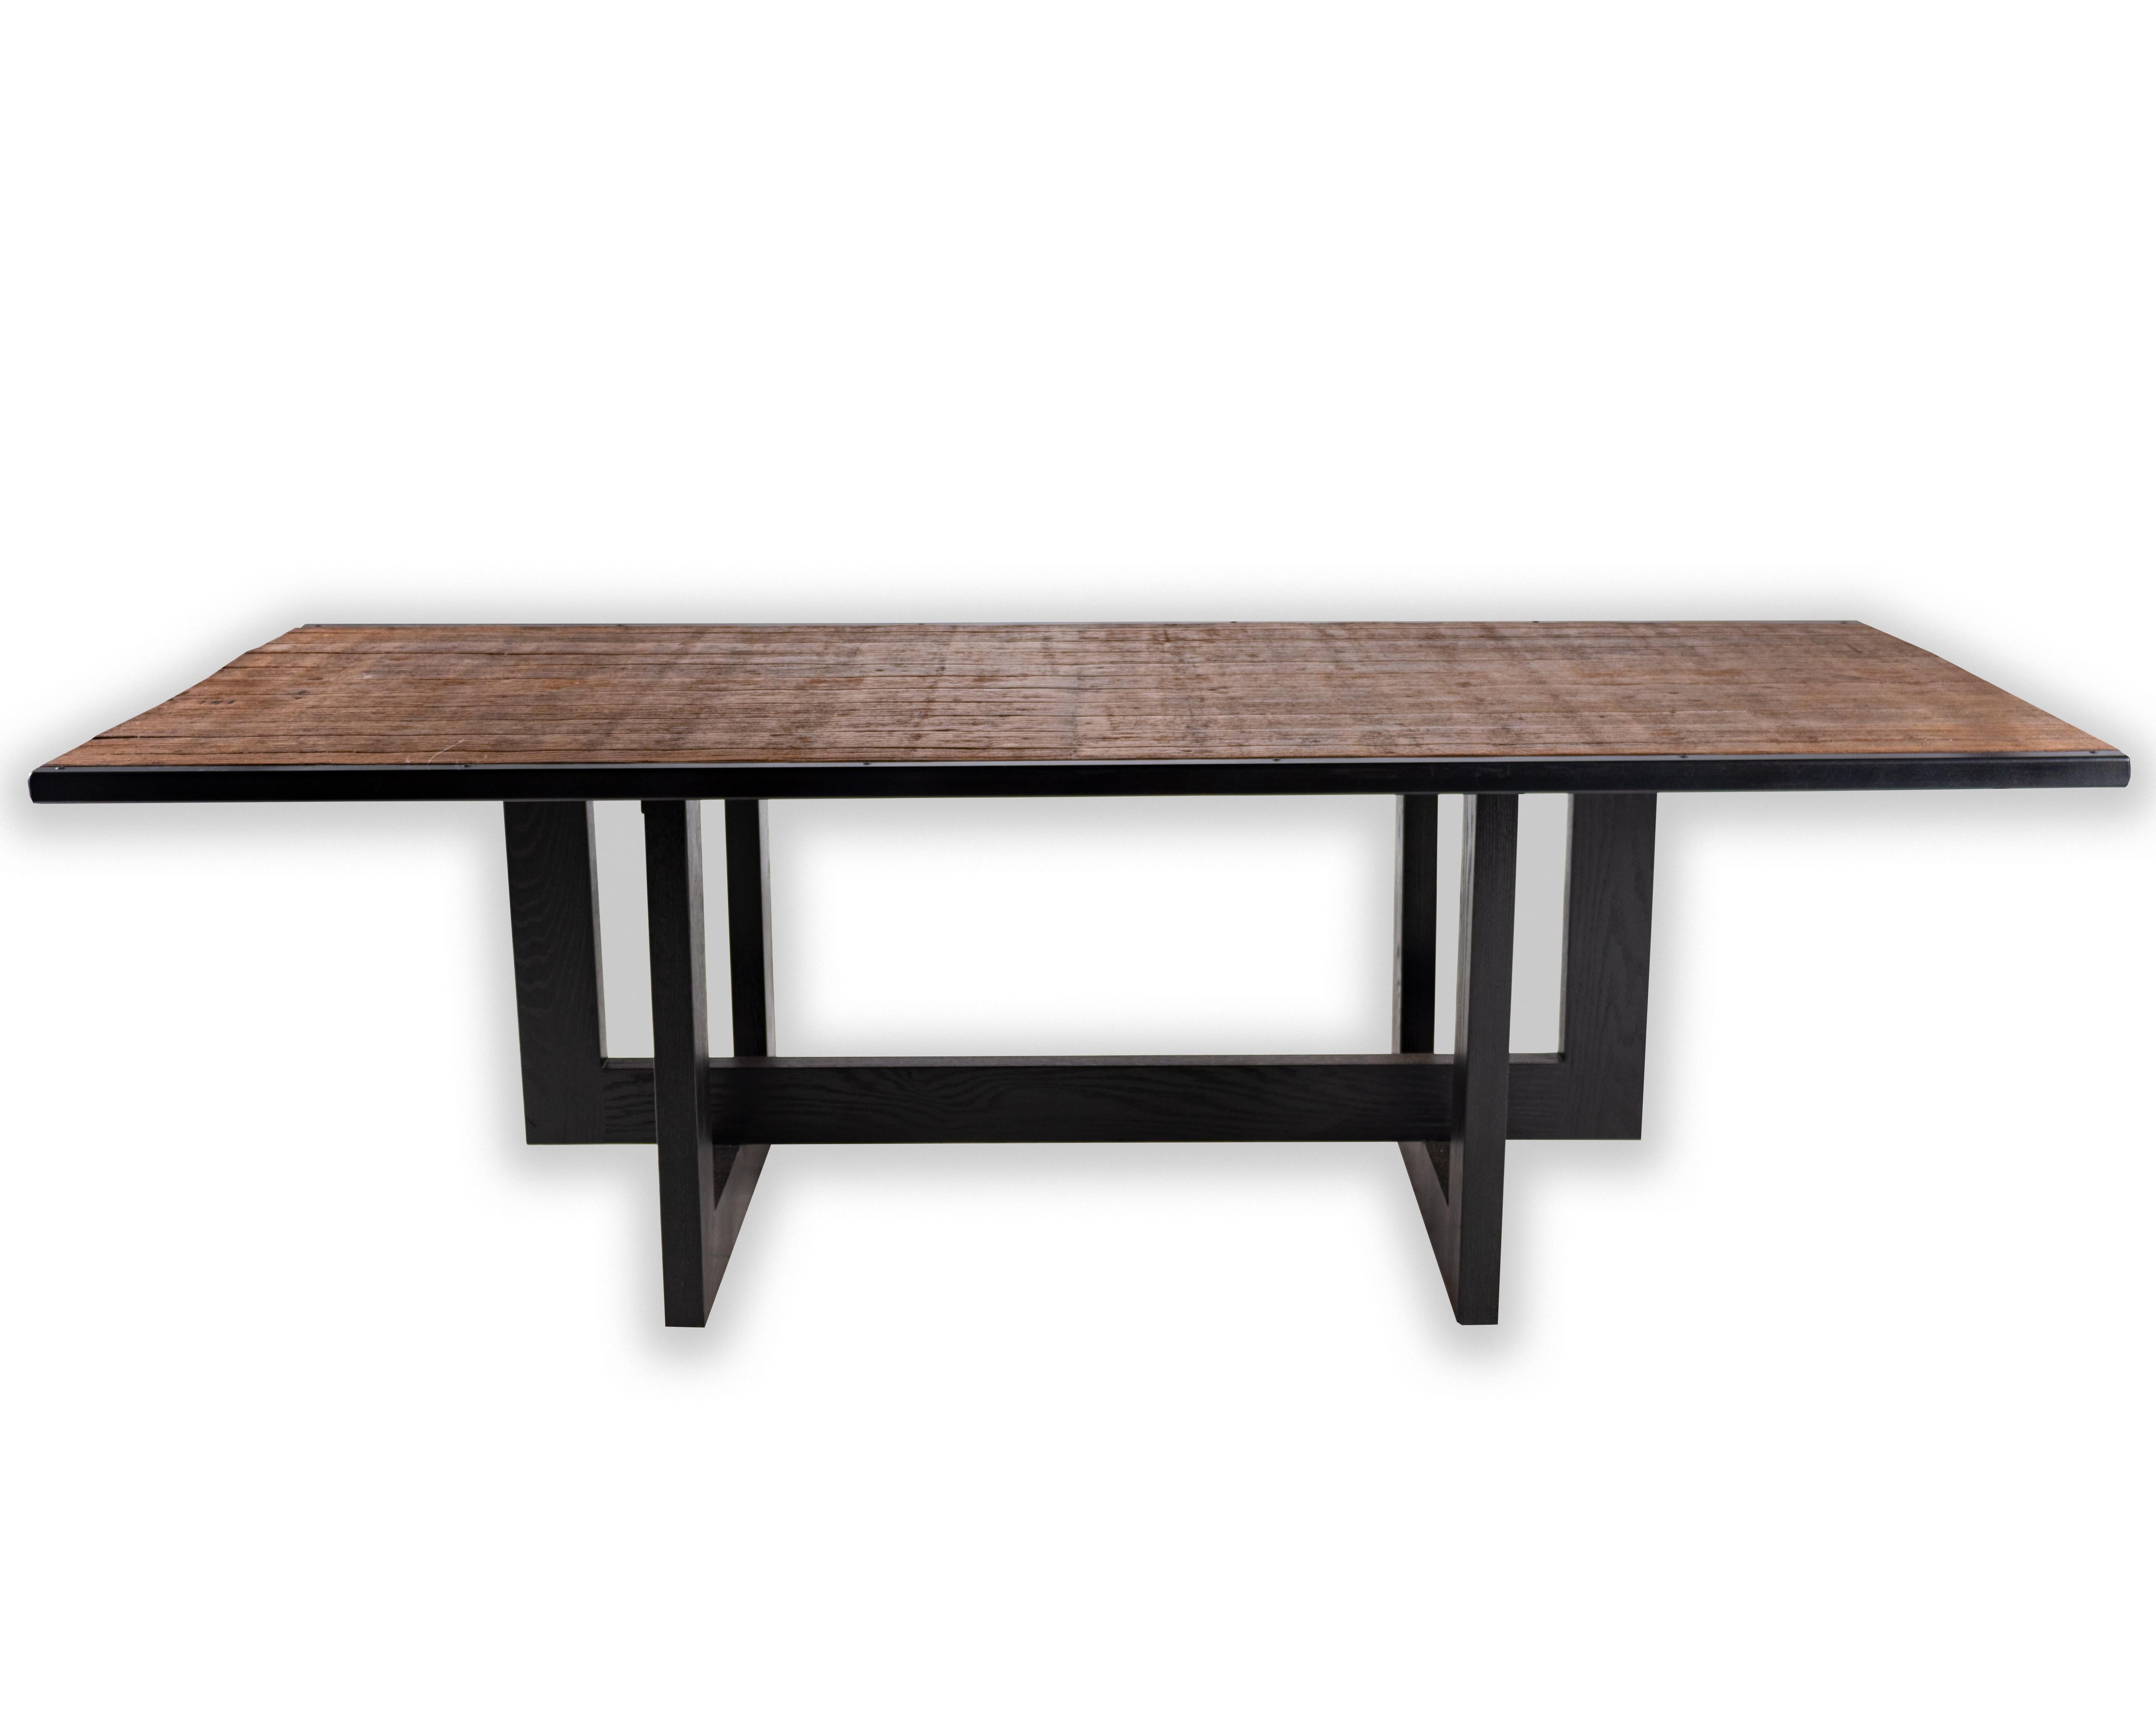 Belgian Brick baking pallet dining table, with a patinated geometric ebony base.

Designed by Brendan Bass for the Vision and Design Collection, by using high quality materials and textures. All materials are sourced from local vendors throughout